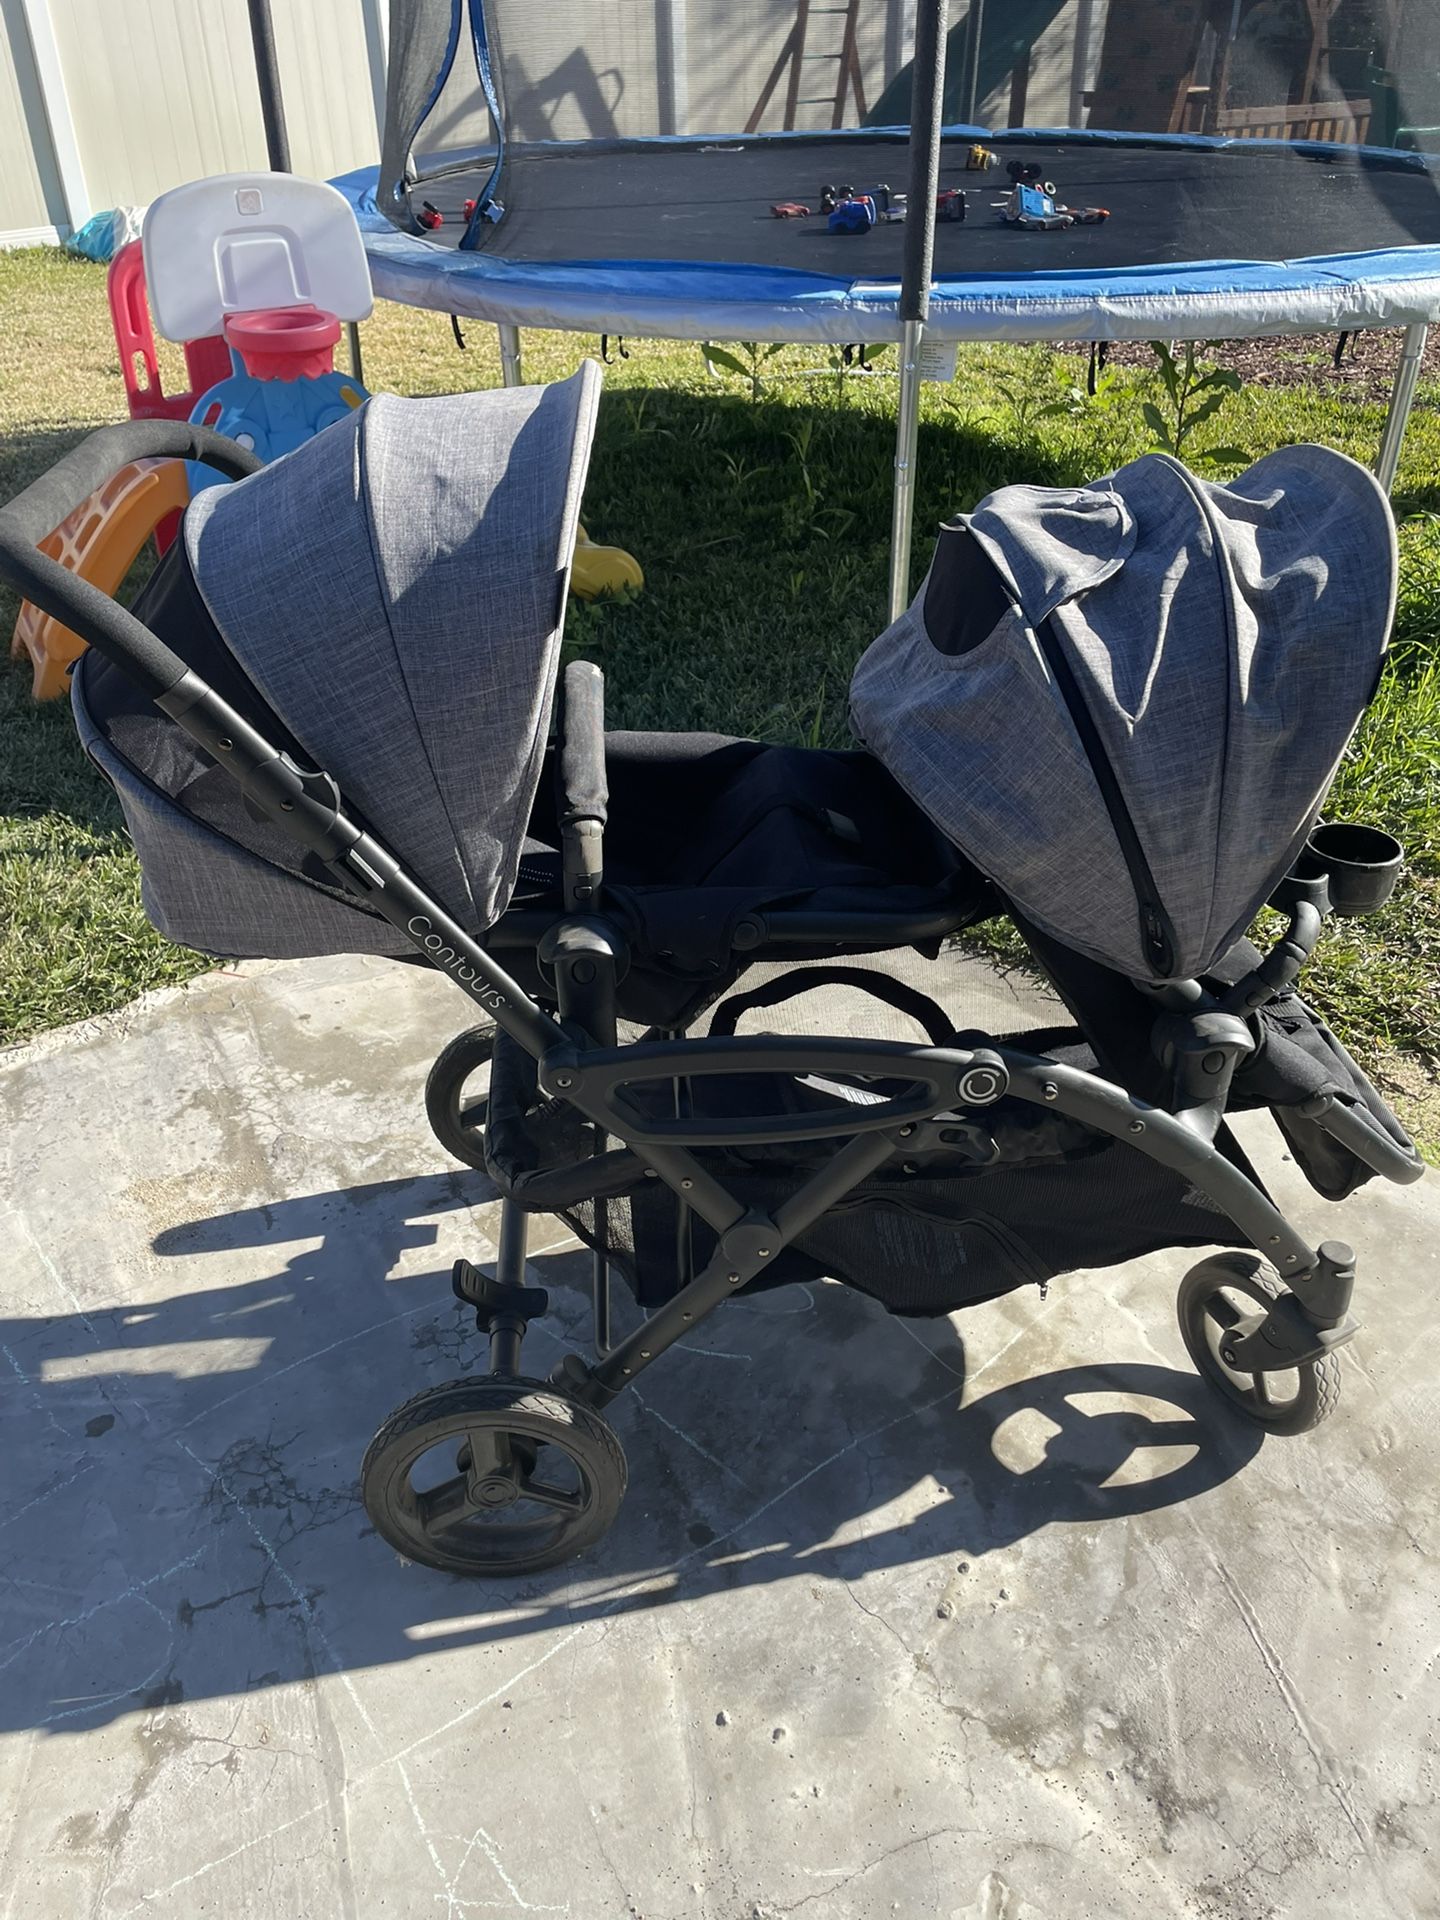 Baby Stroller for Sale in Highland, CA - OfferUp